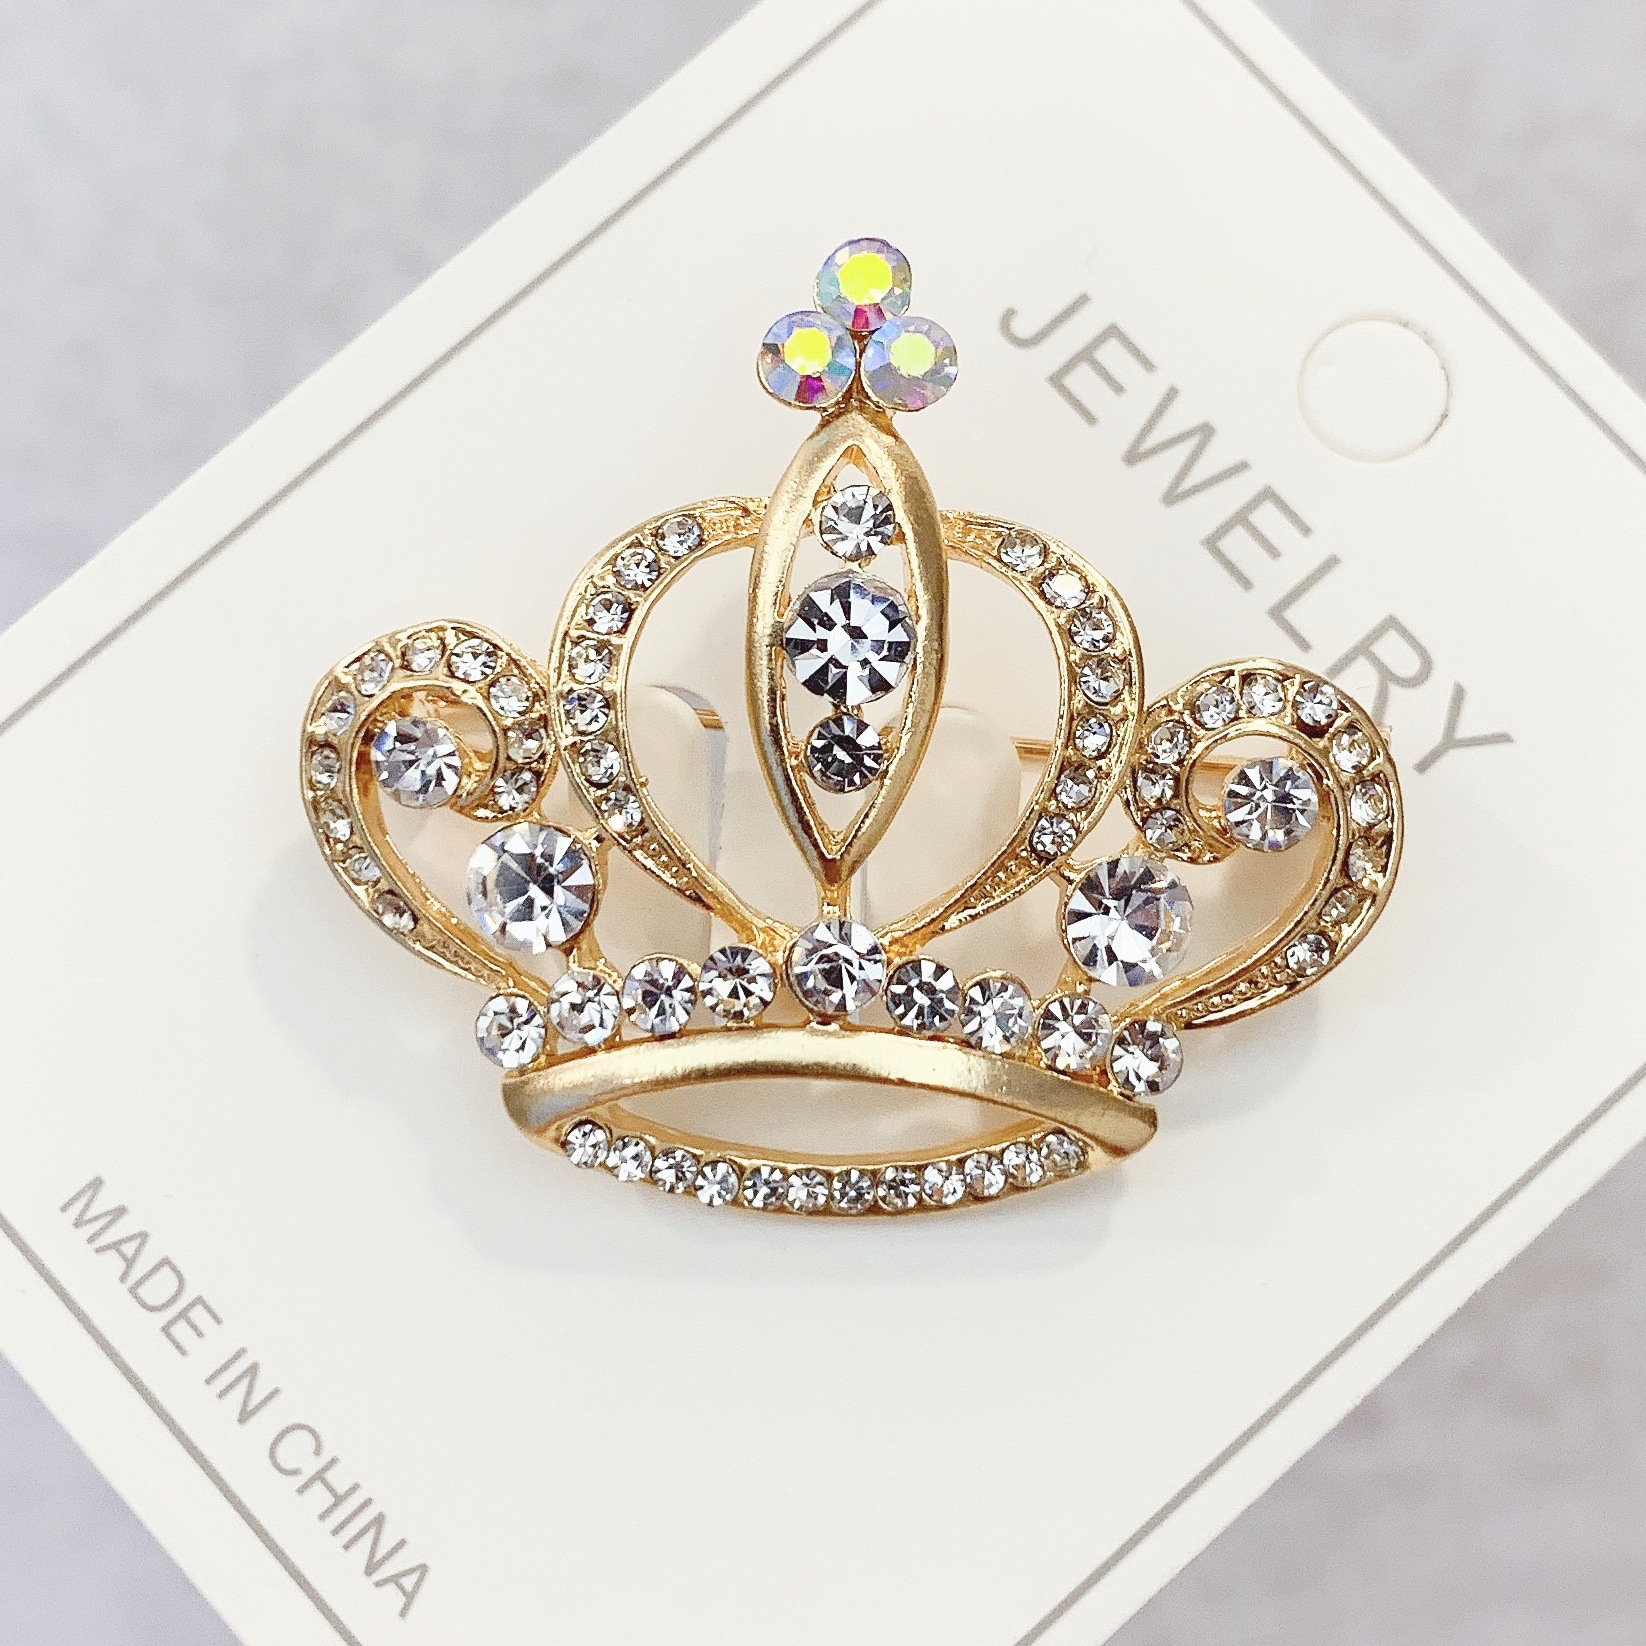 Korean-style alloy rhinestone crown brooch high-end suit professional clothing accessories anti-stray pin corsage